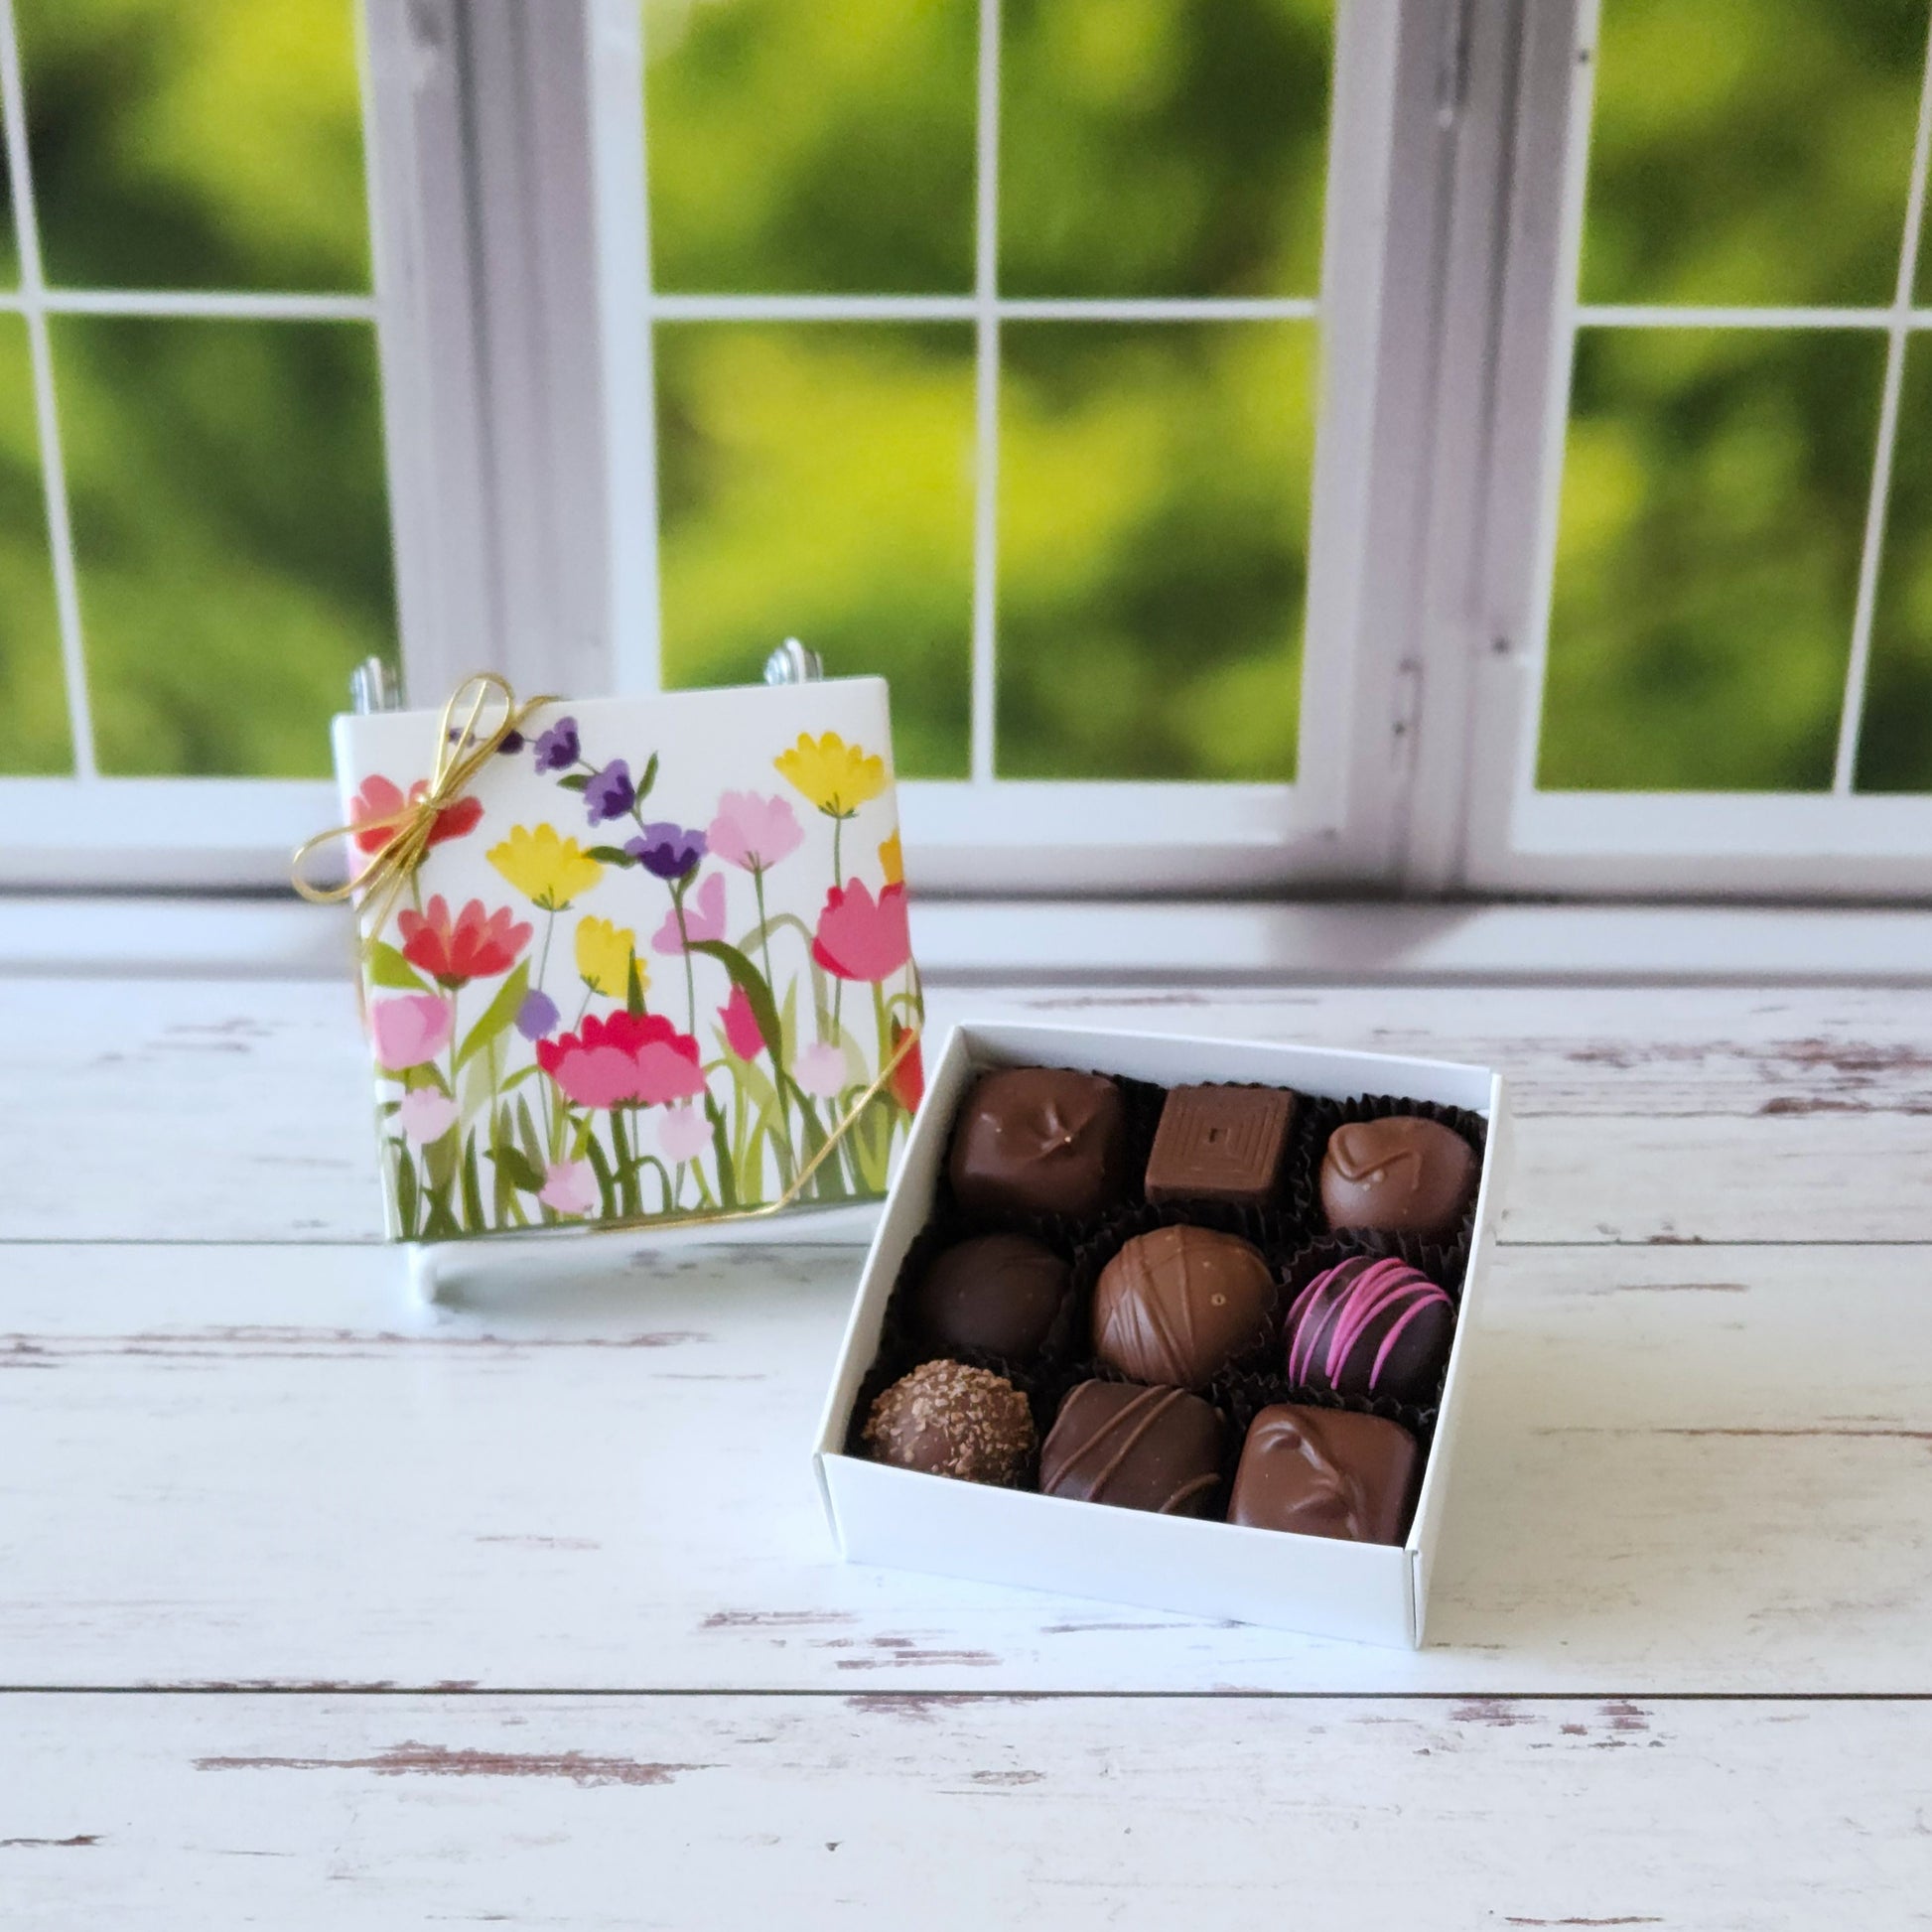 Spring flowers decorate the cover of this 9 piece Milk and Dark Chocolate Assortment. The box is filled with Creams, Caramels, Meltaways and Truffles.